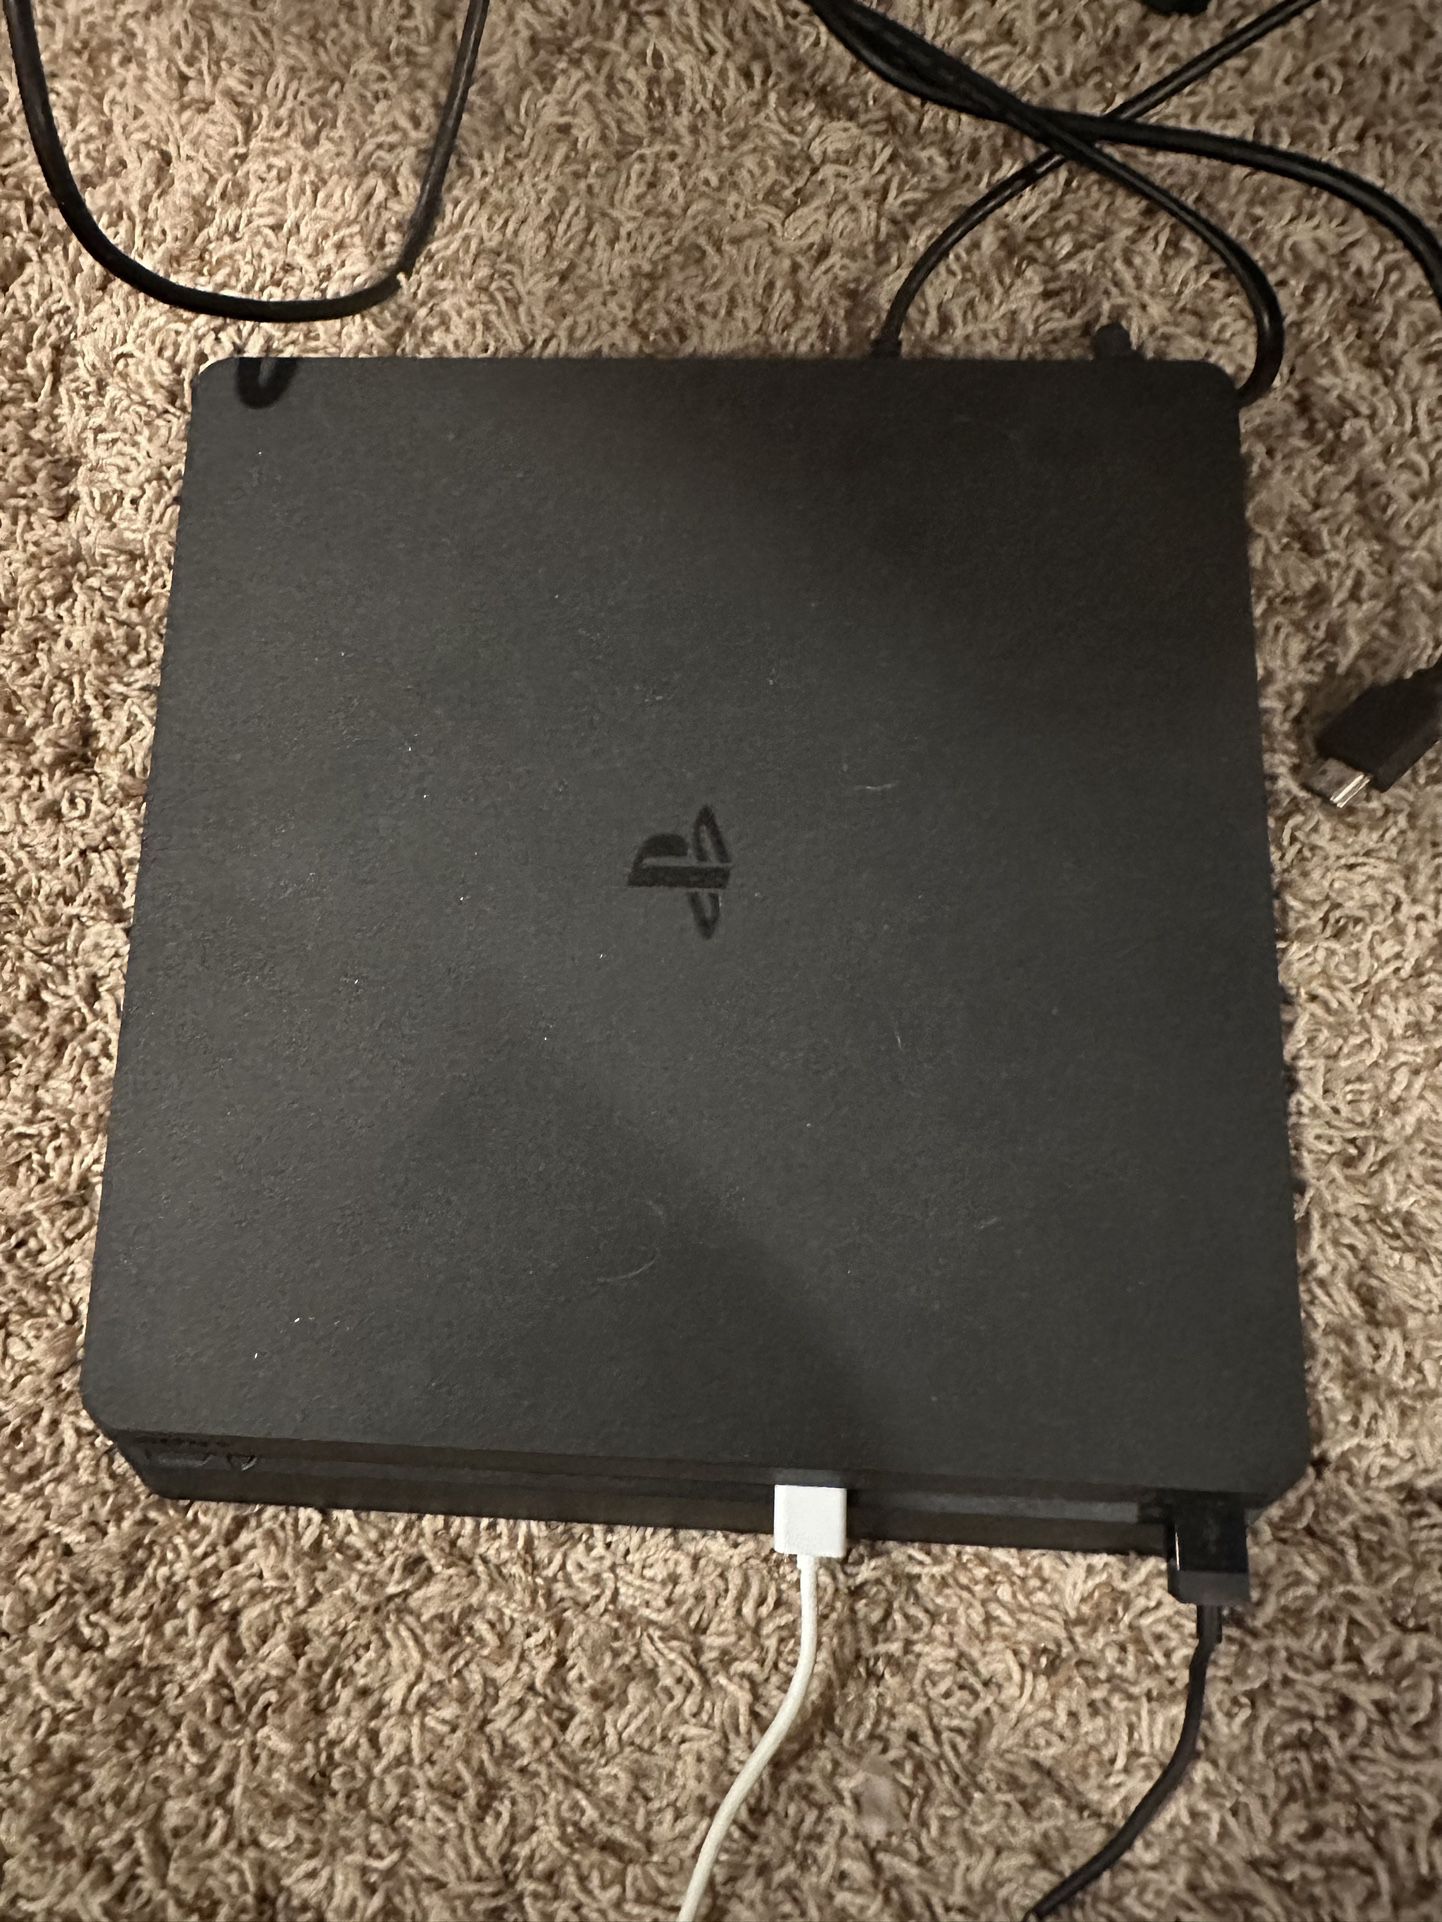 PS4 Slim 1TB Bundle (Cables and Chargers Included)